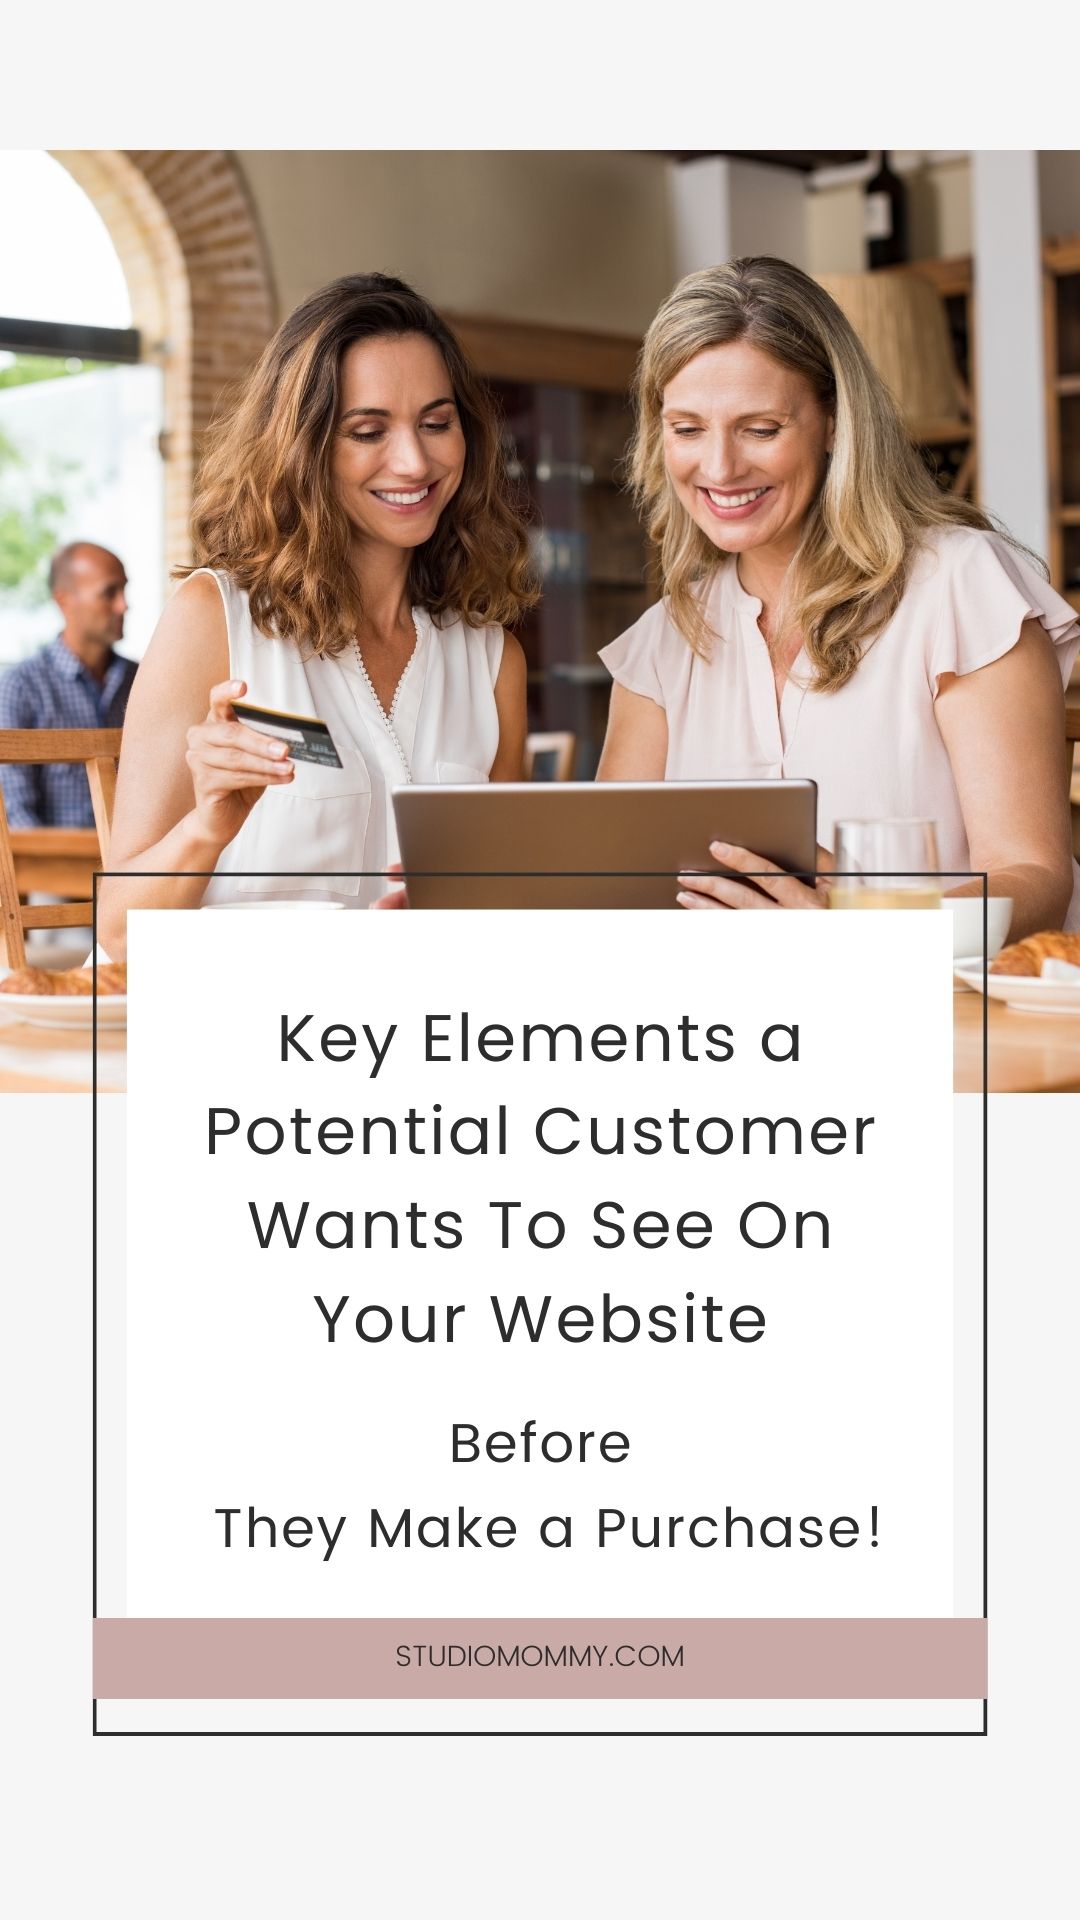 Key Elements That a Customer Wants On Your Website